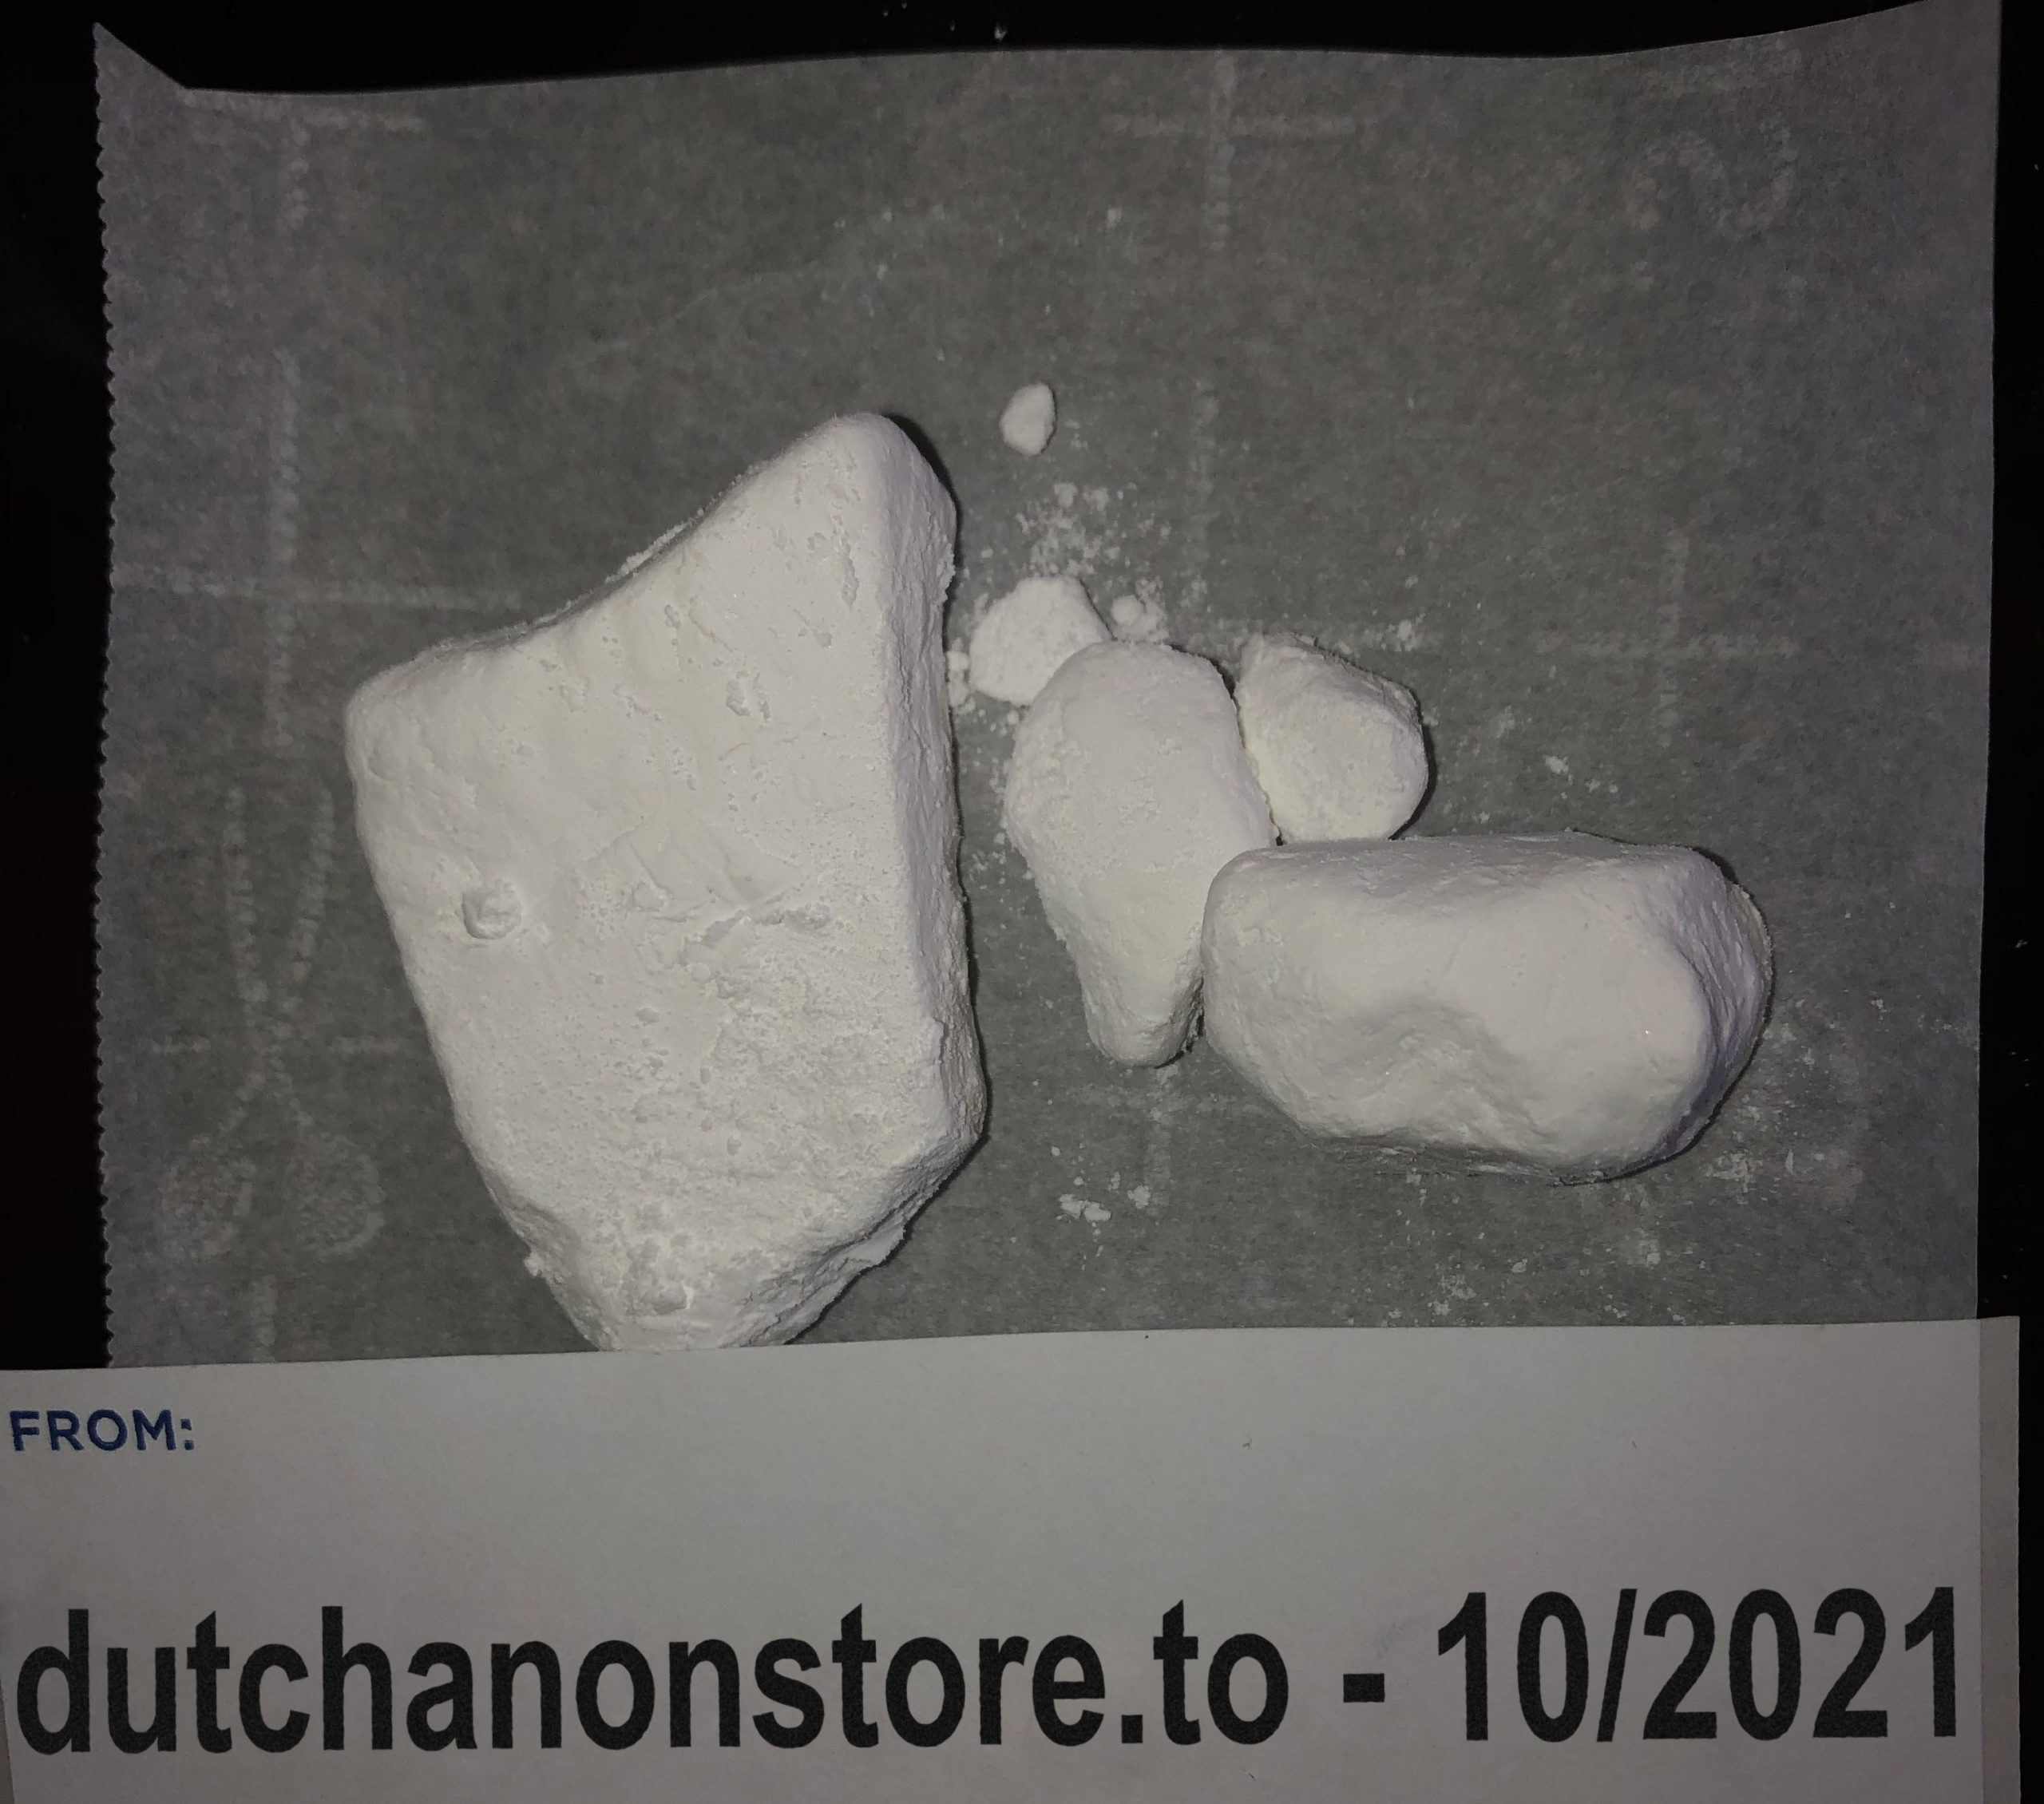 1g-28g ☠ FENTANYL ☠ level #4 VERY POTENT (US 2 US) Image